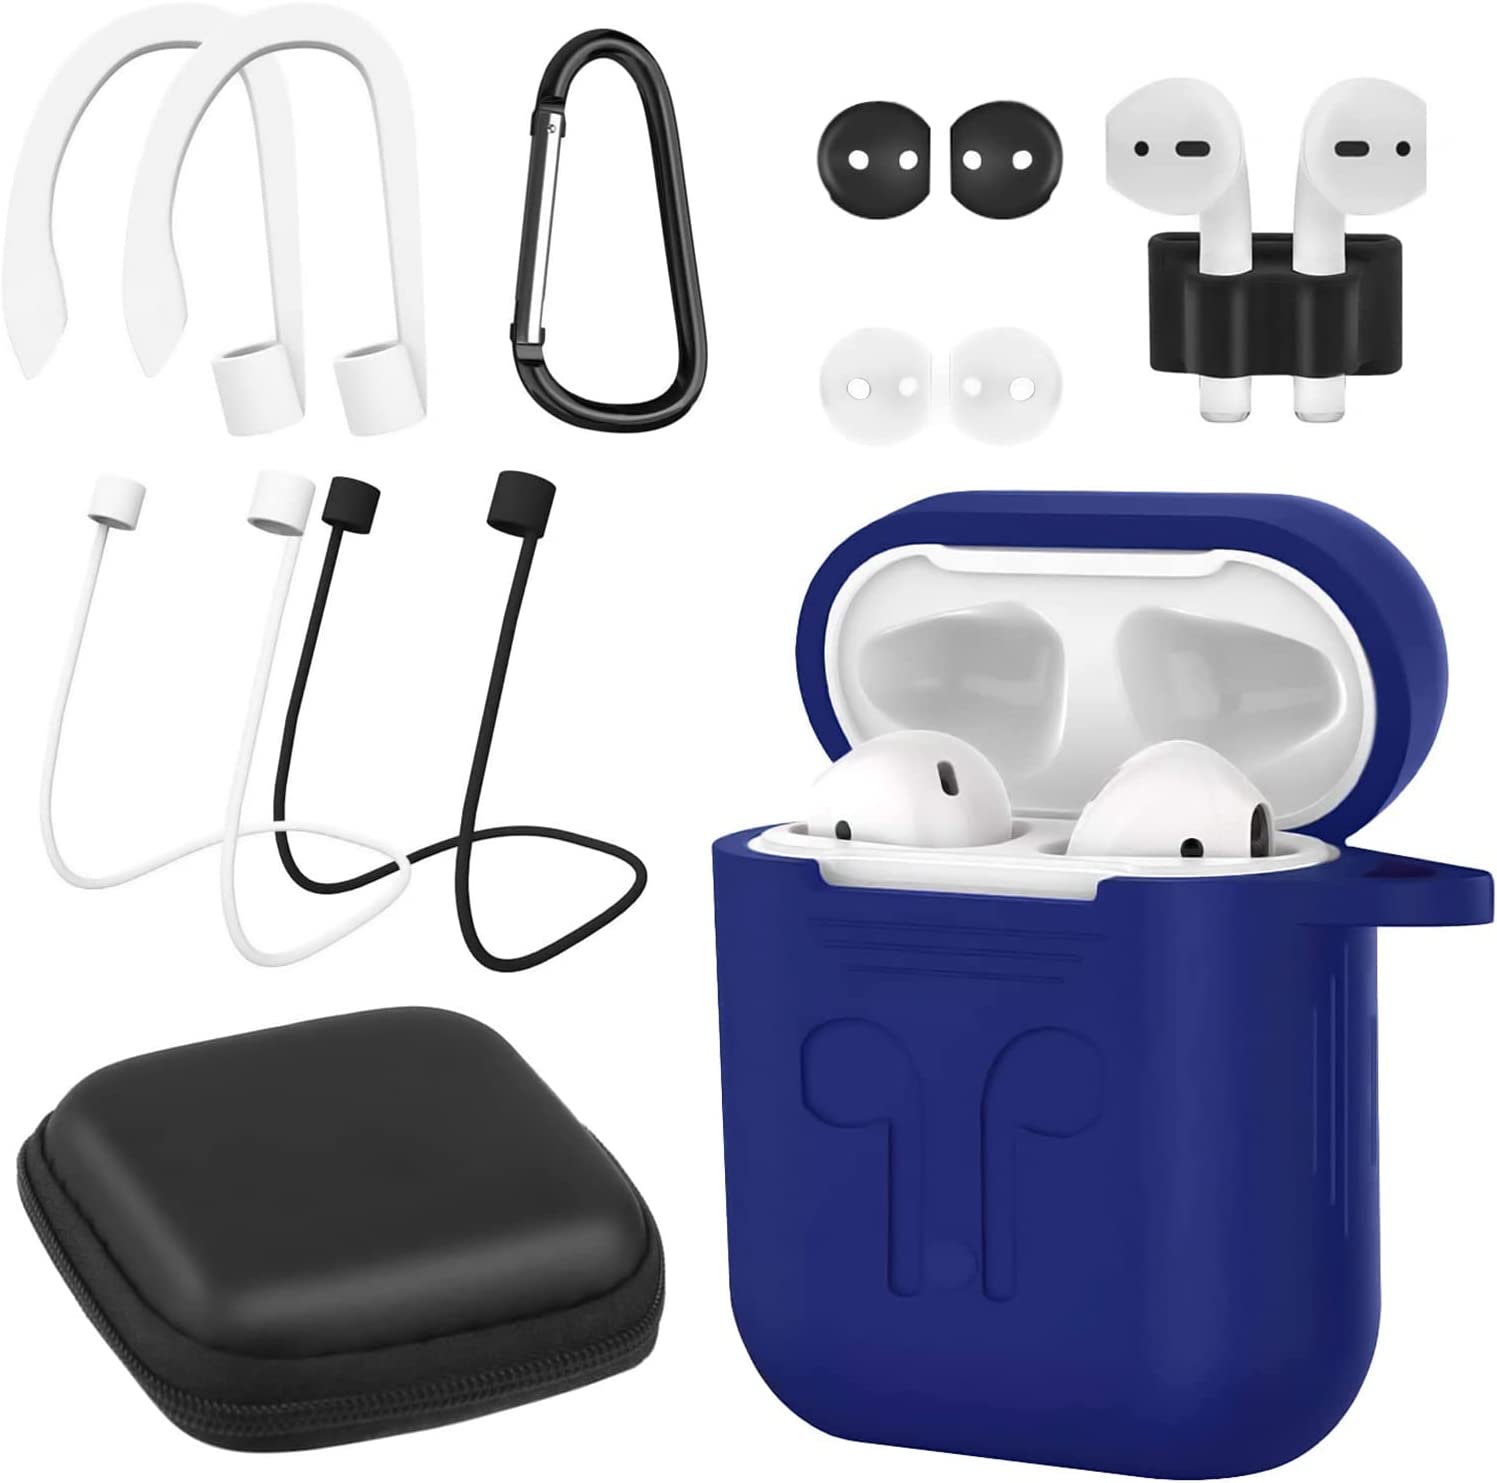 Aunek AirPods Case Cover Soft 9 in 1 Supports Wireless Charging RRP £5.99 CLEARANCE XL £4.99